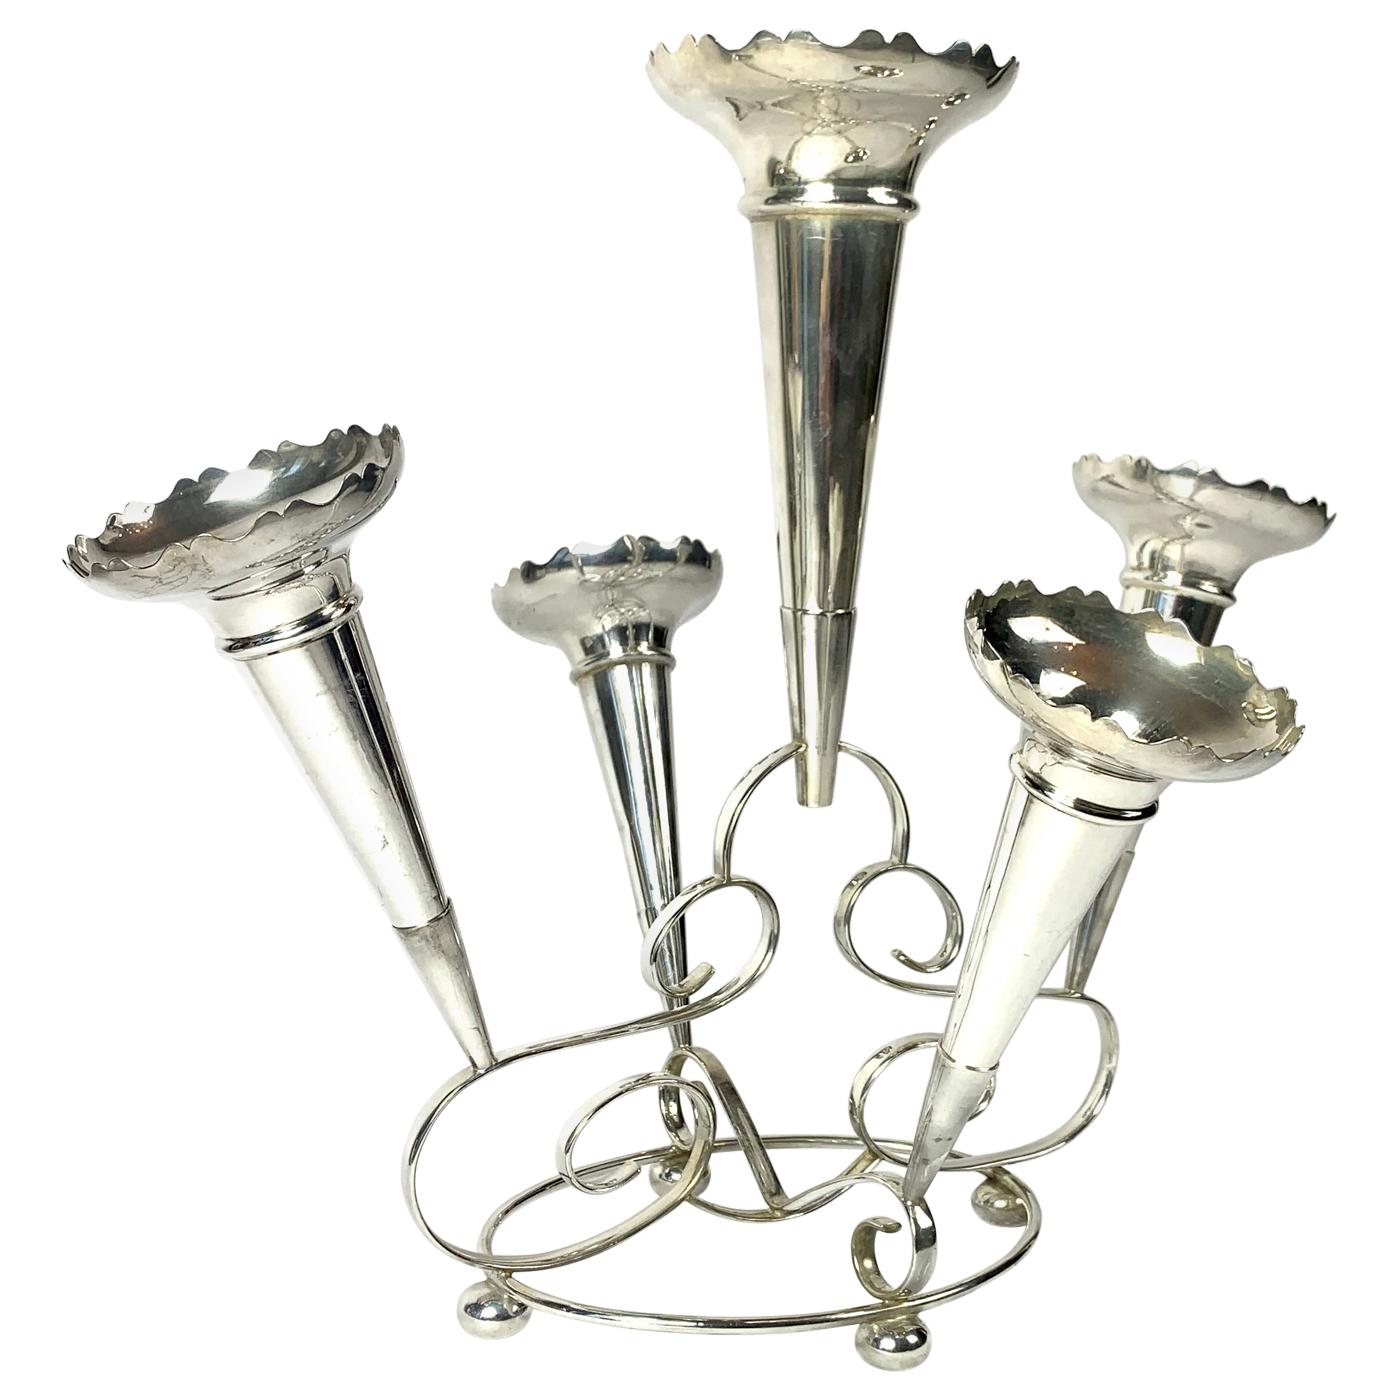 Edwardian Silver Plate Flower Vase Epergne Centerpiece with Five Tulip Vases